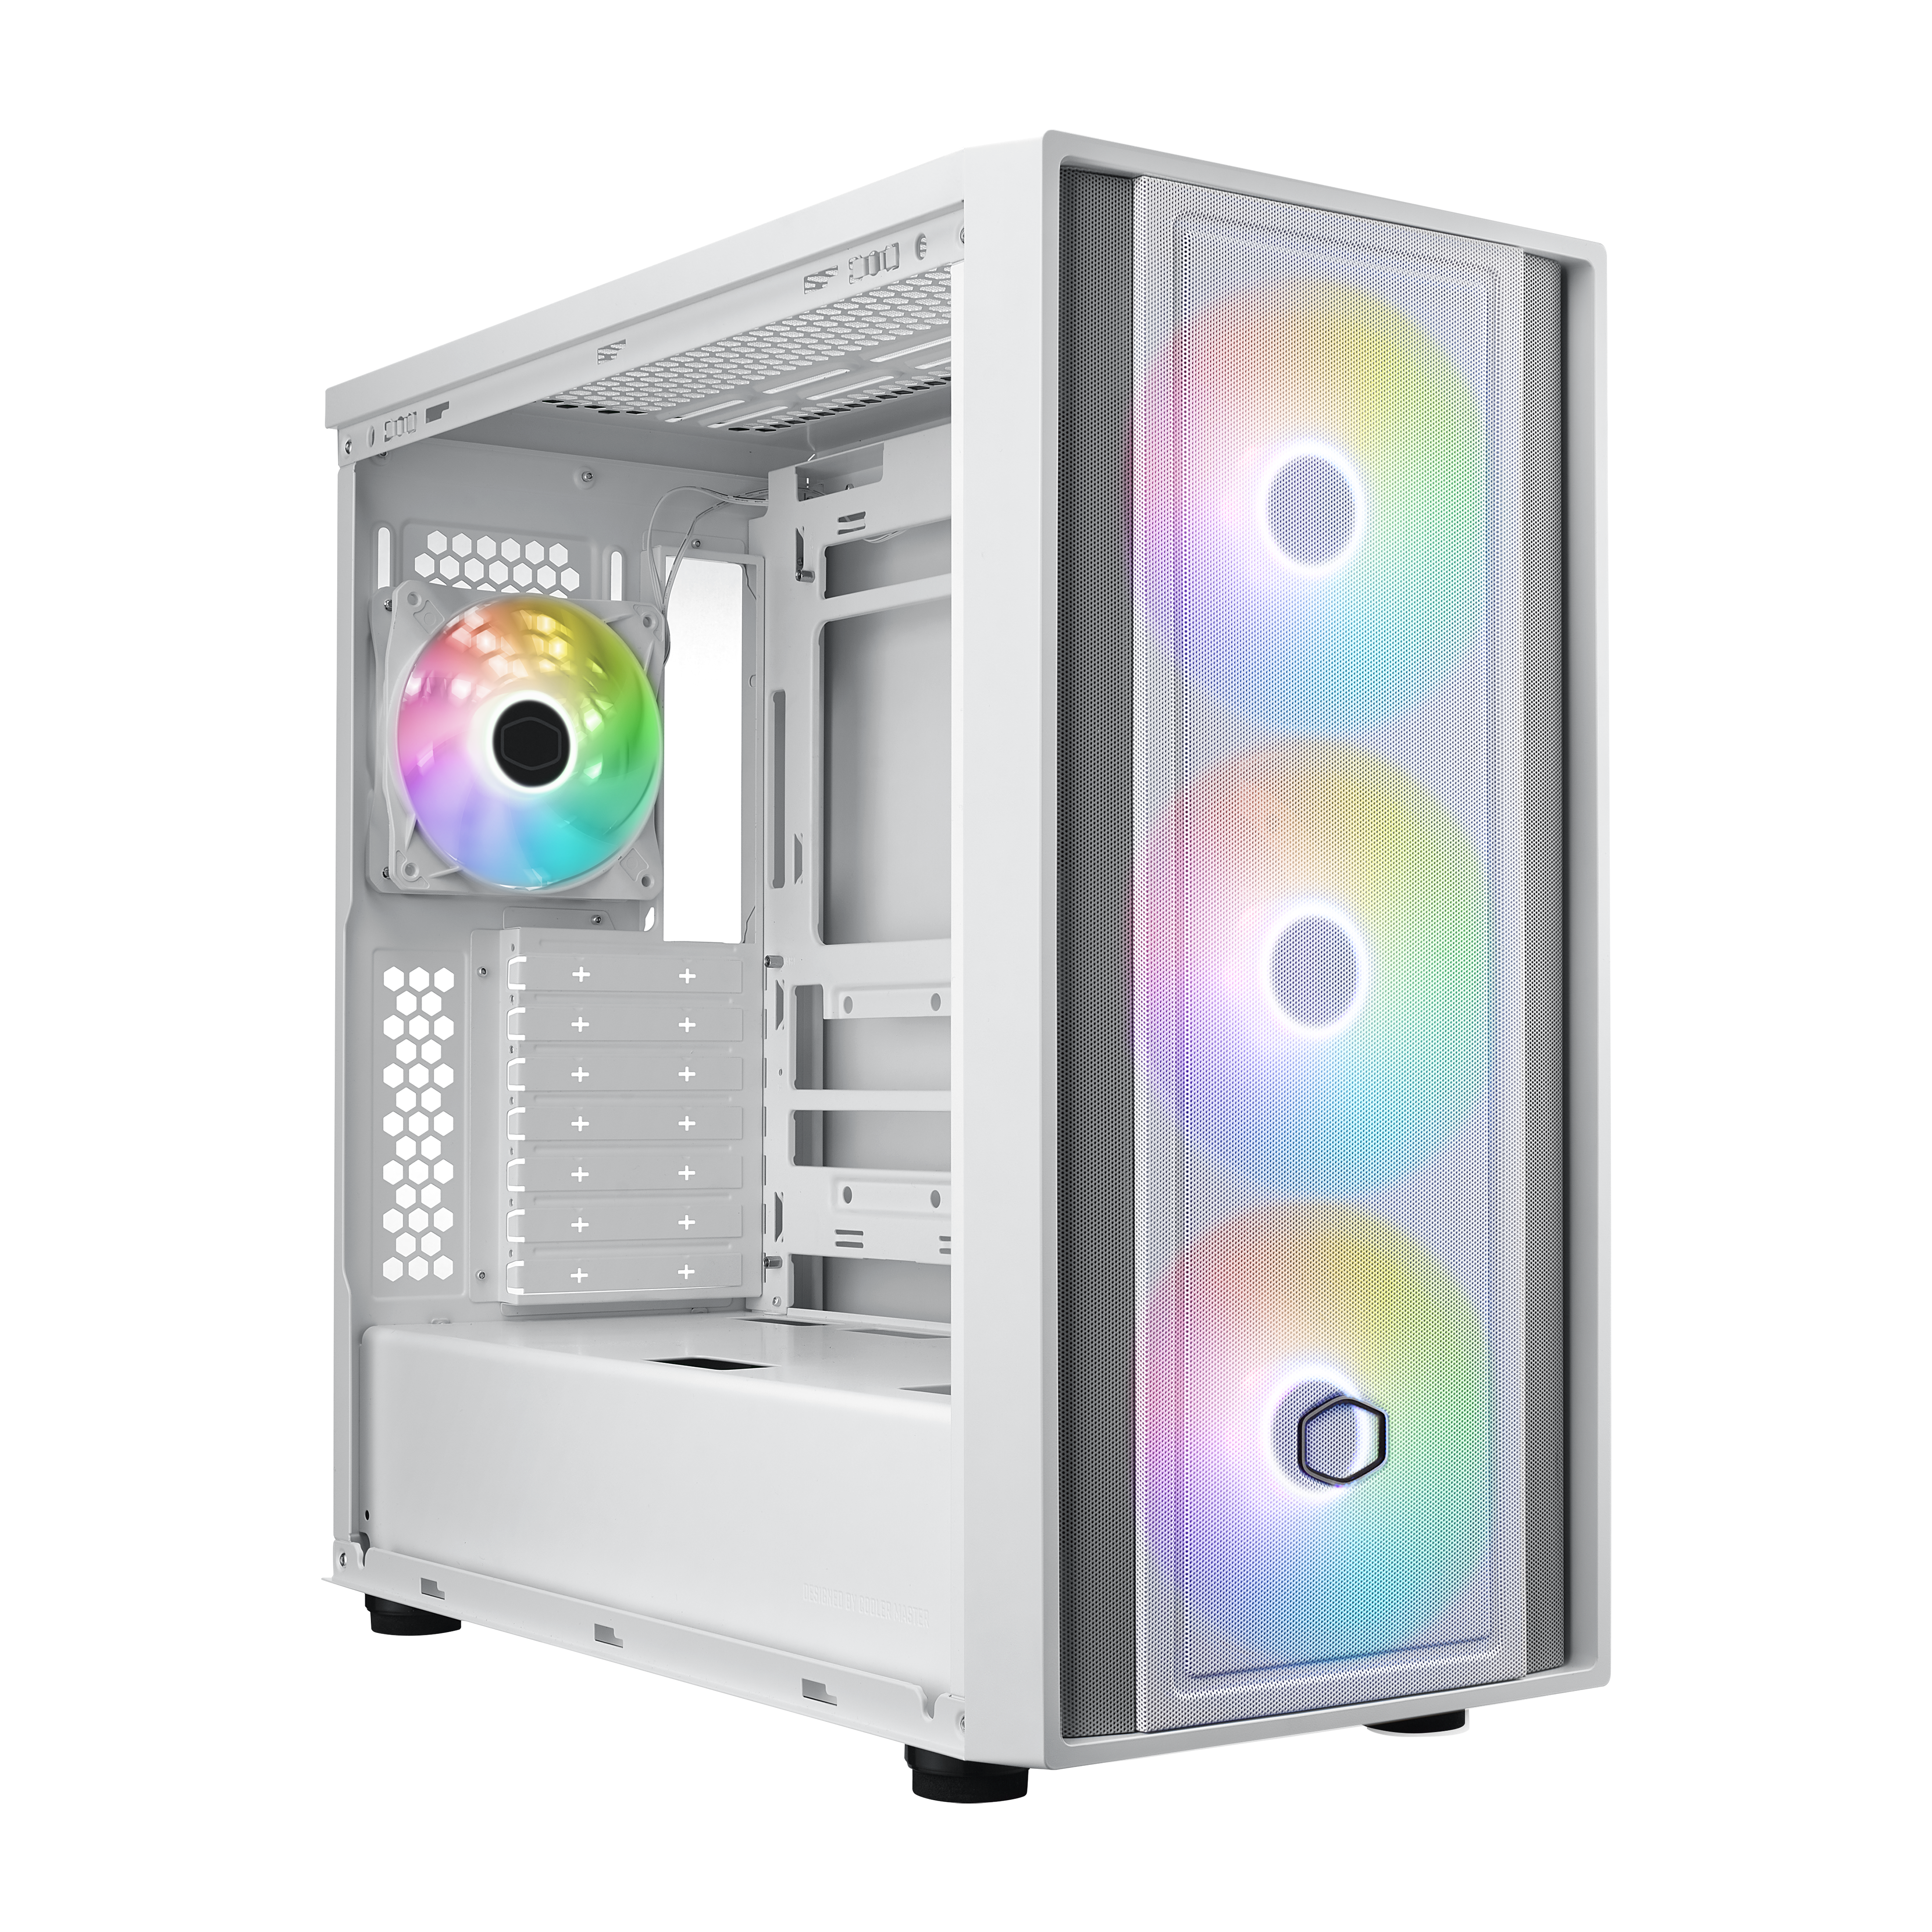 Cooler Master MasterBox 600 Mid Tower ATX Case - White